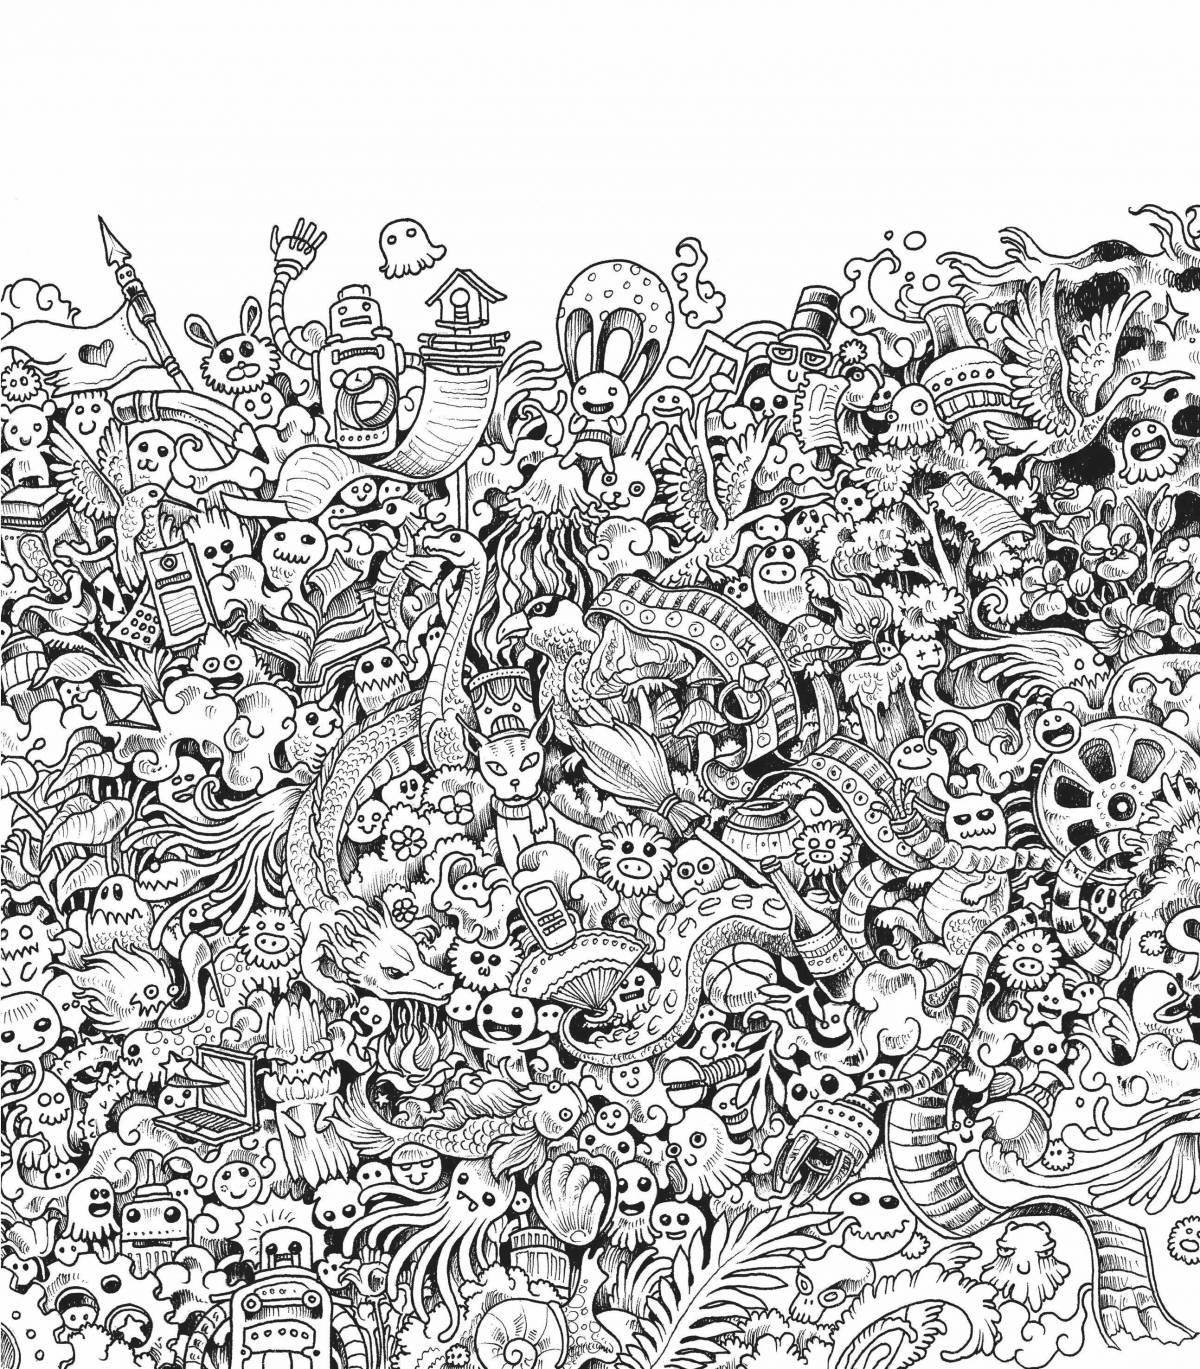 Dazzling coloring page black and white complex